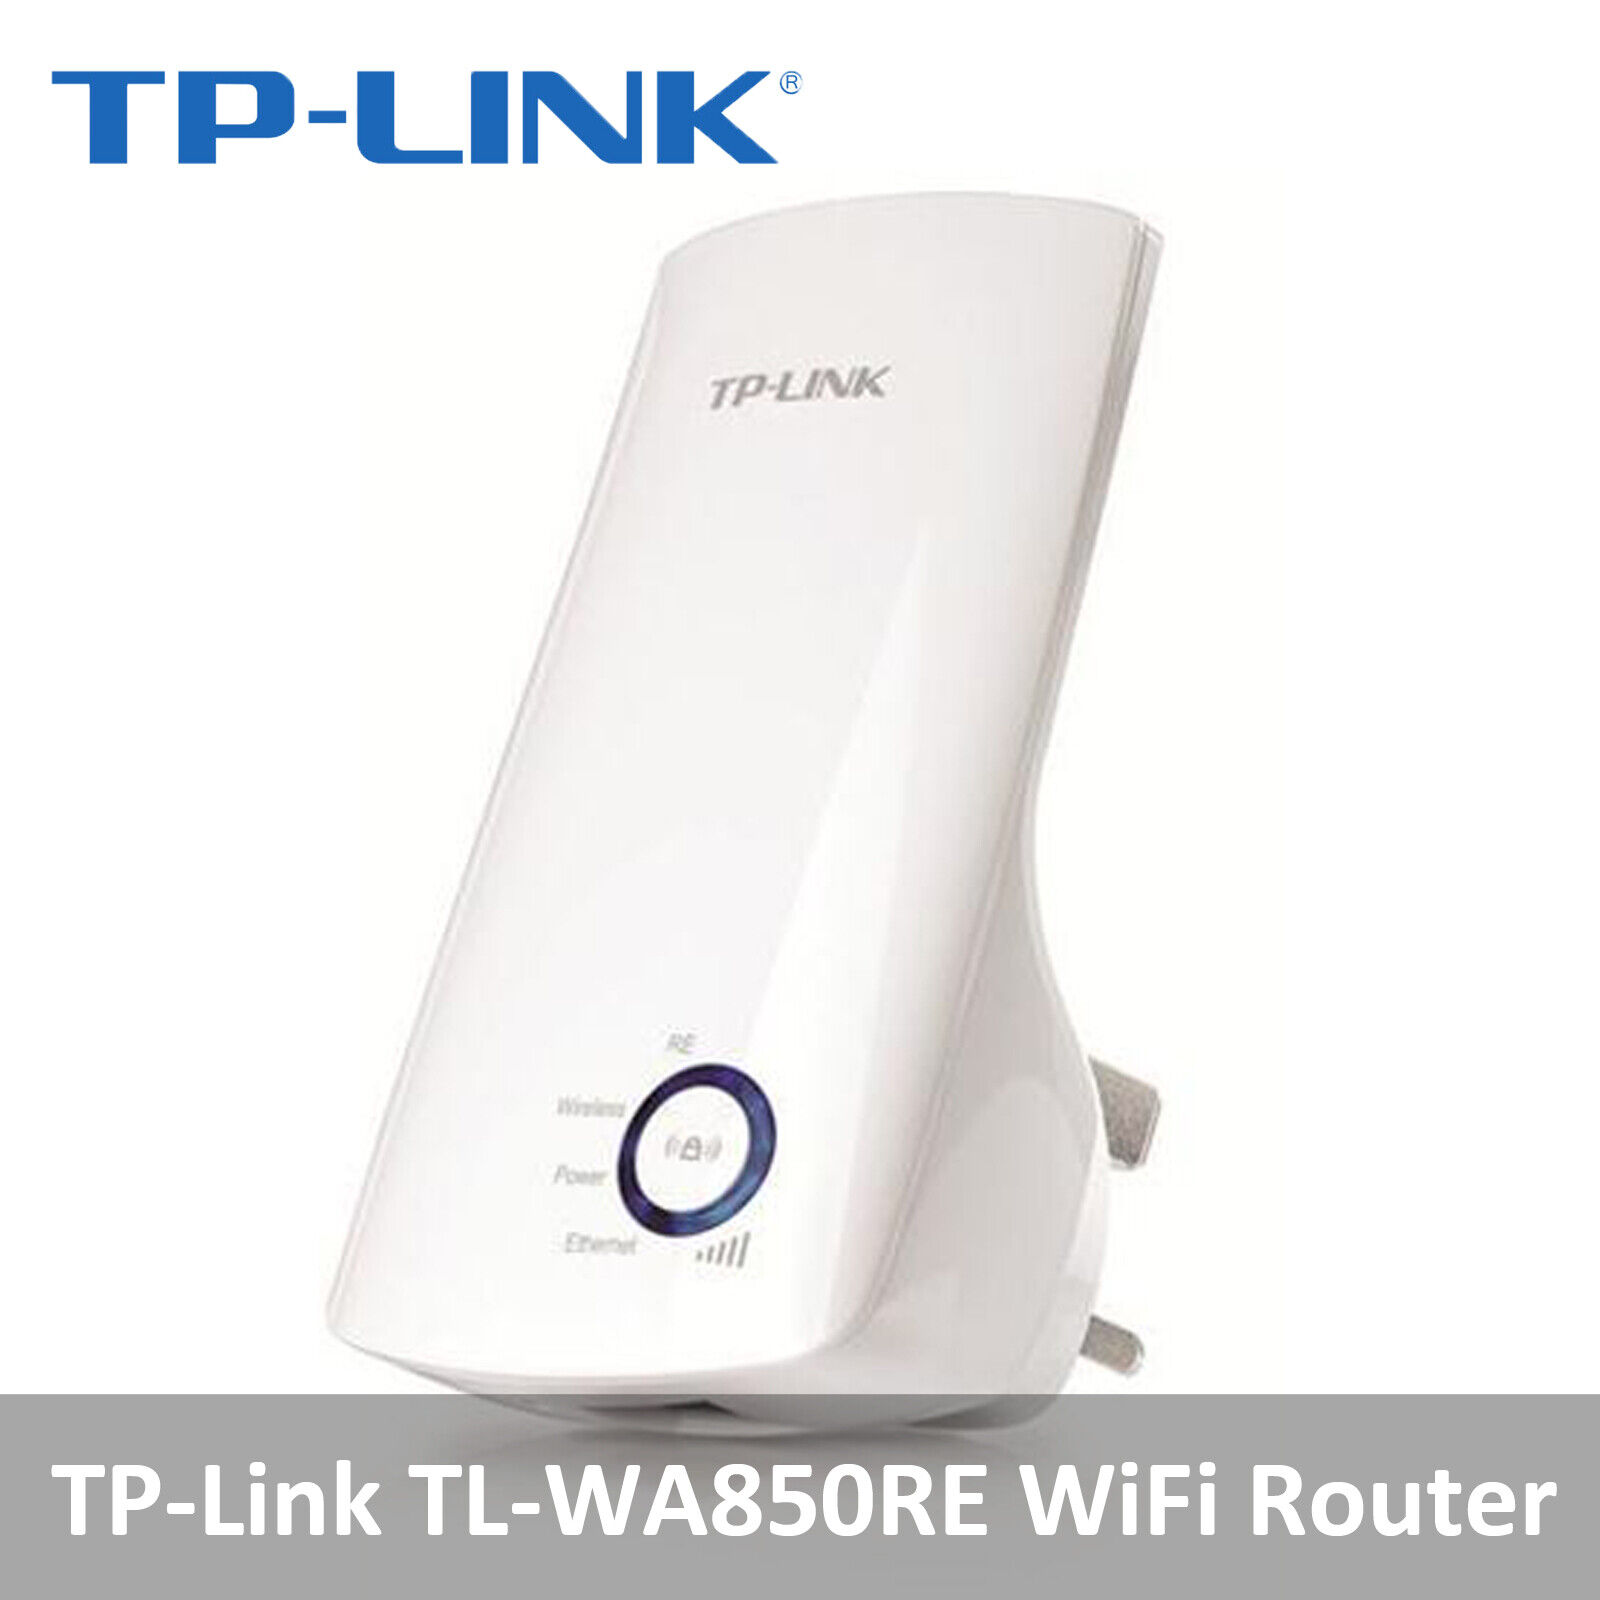 TP-Link TL-WA850RE 300Mbps Universal WiFi Range Extender,Repeater Plug&Play NEW